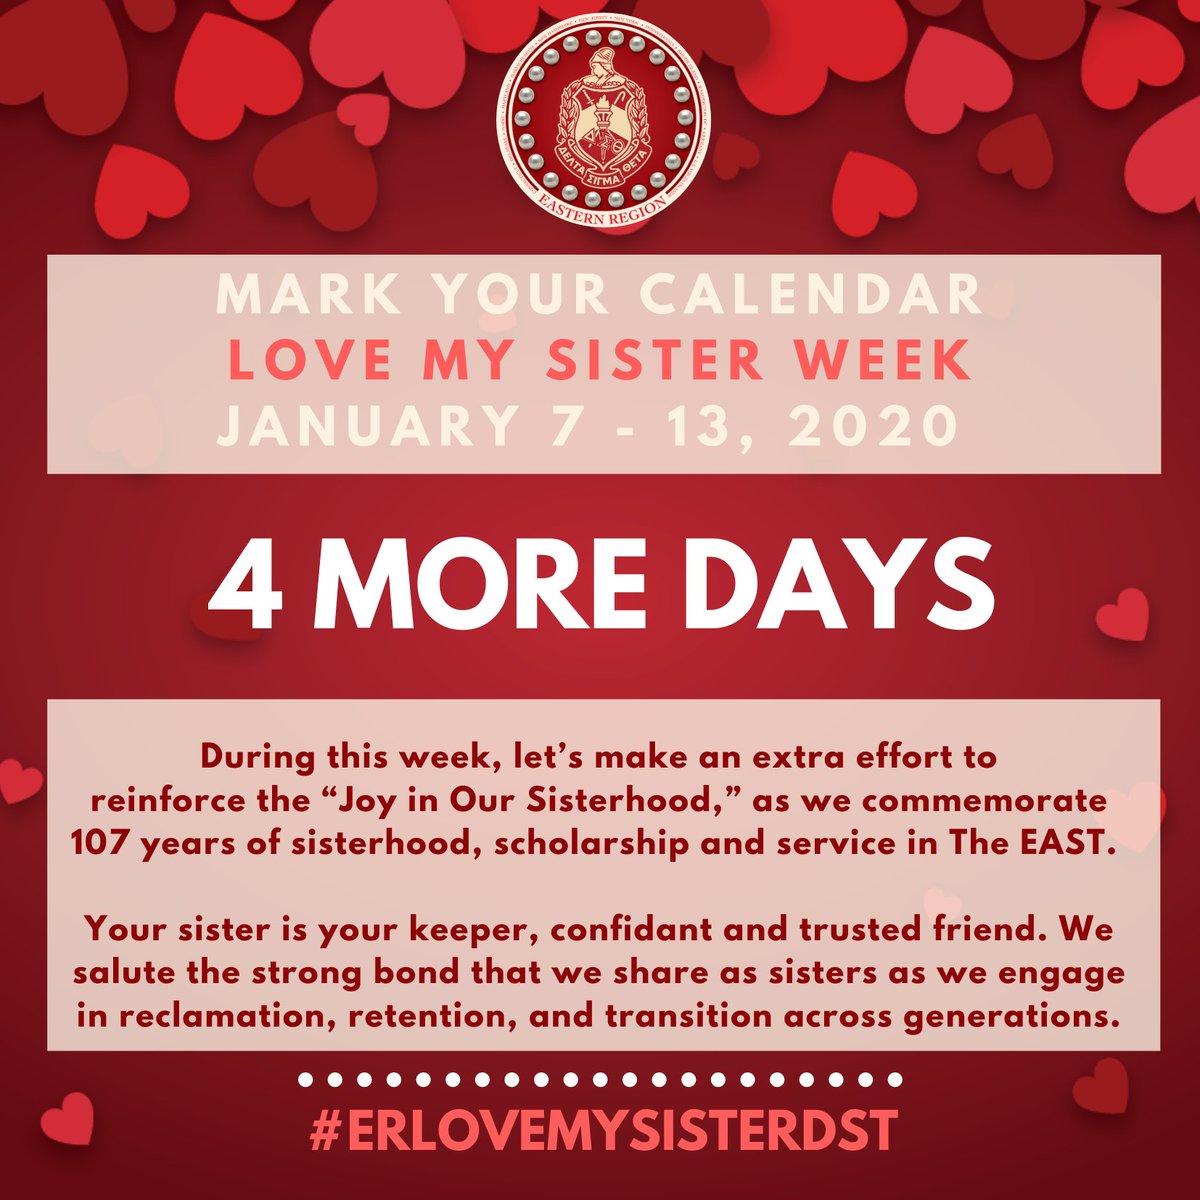 Easternregiondst On Twitter Red Alert 4 Day Countdown To Love My Sister Week January 7 13 2020 During This Week Let S Make An Extra Effort To Reinforce The Joy In Our Sisterhood As We